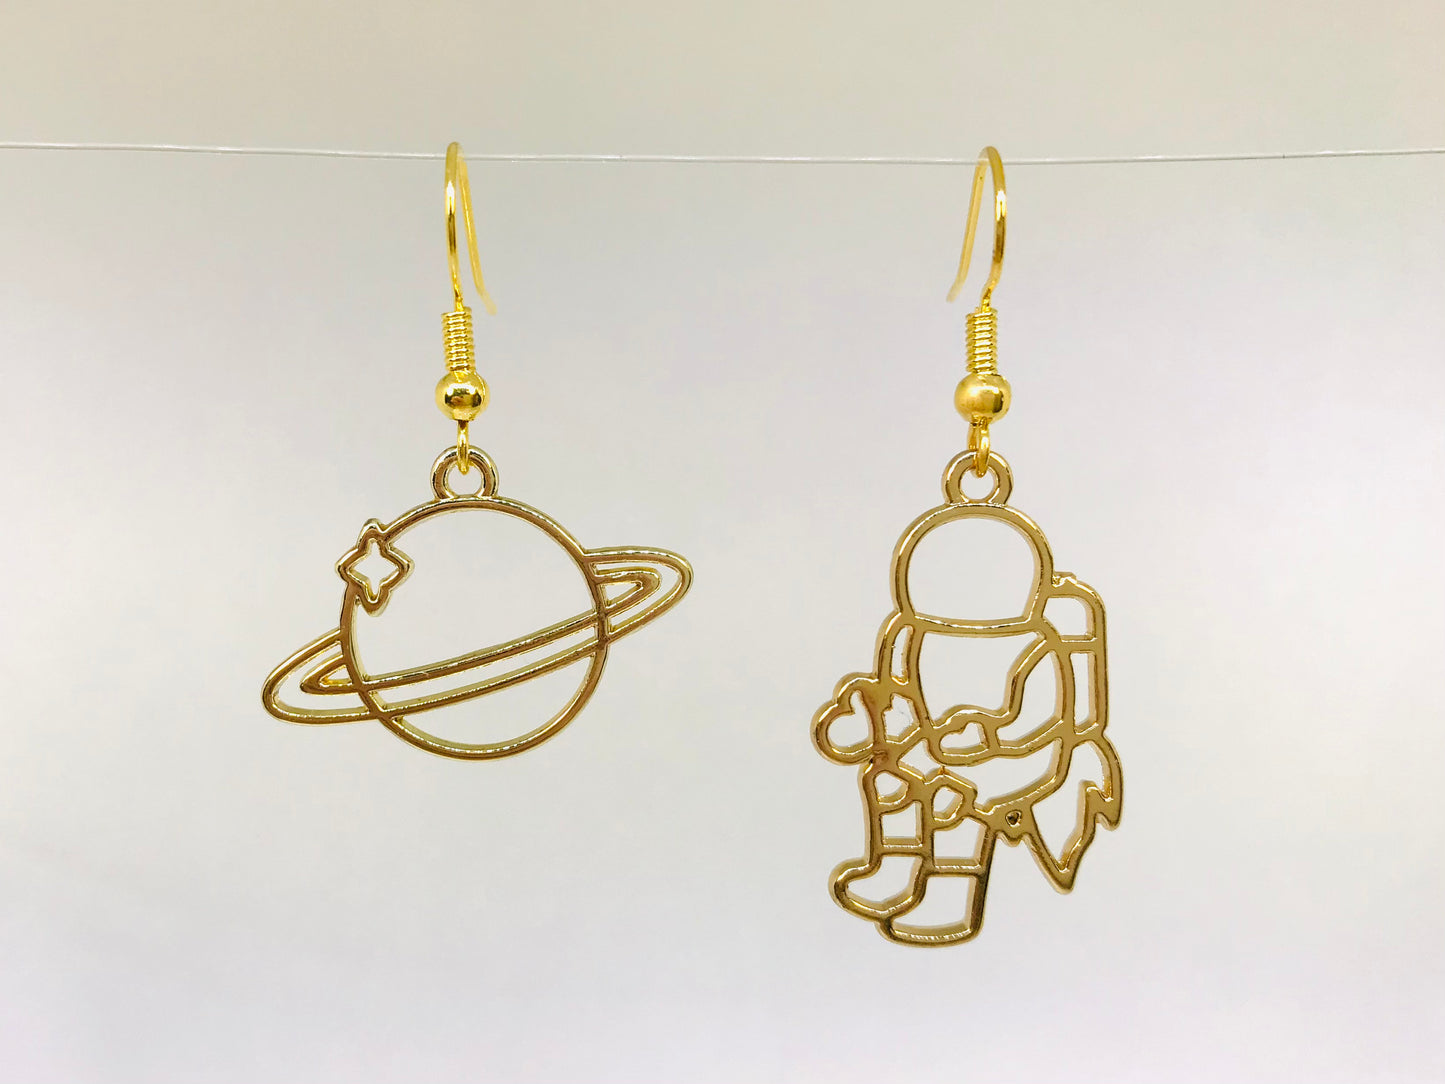 Planet and Space shuttle Earrings